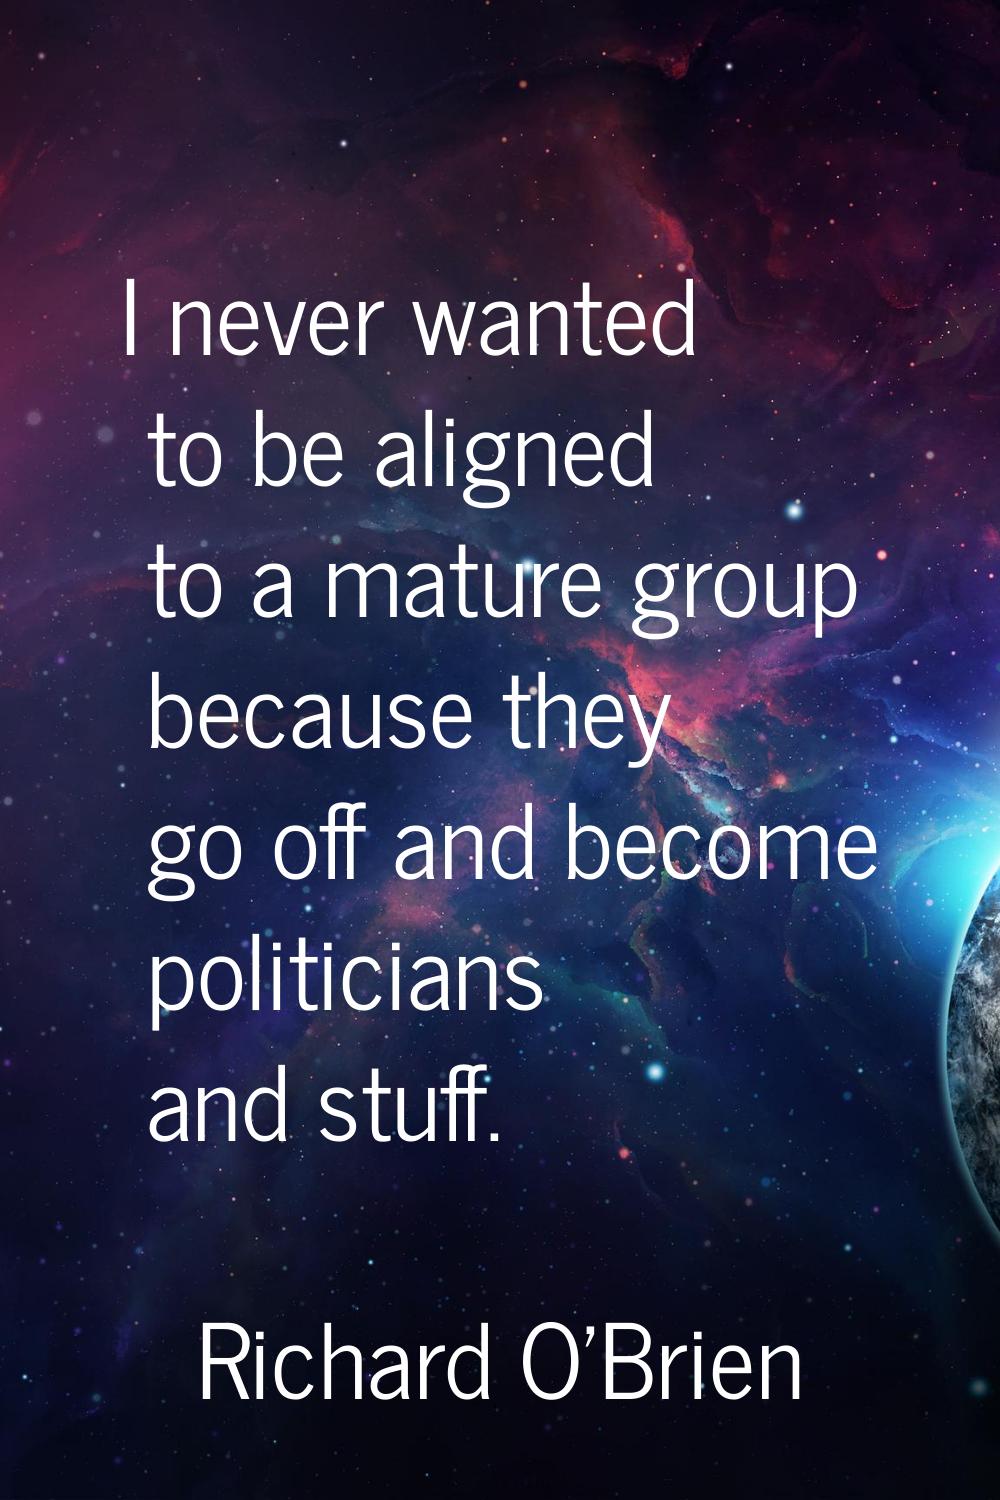 I never wanted to be aligned to a mature group because they go off and become politicians and stuff